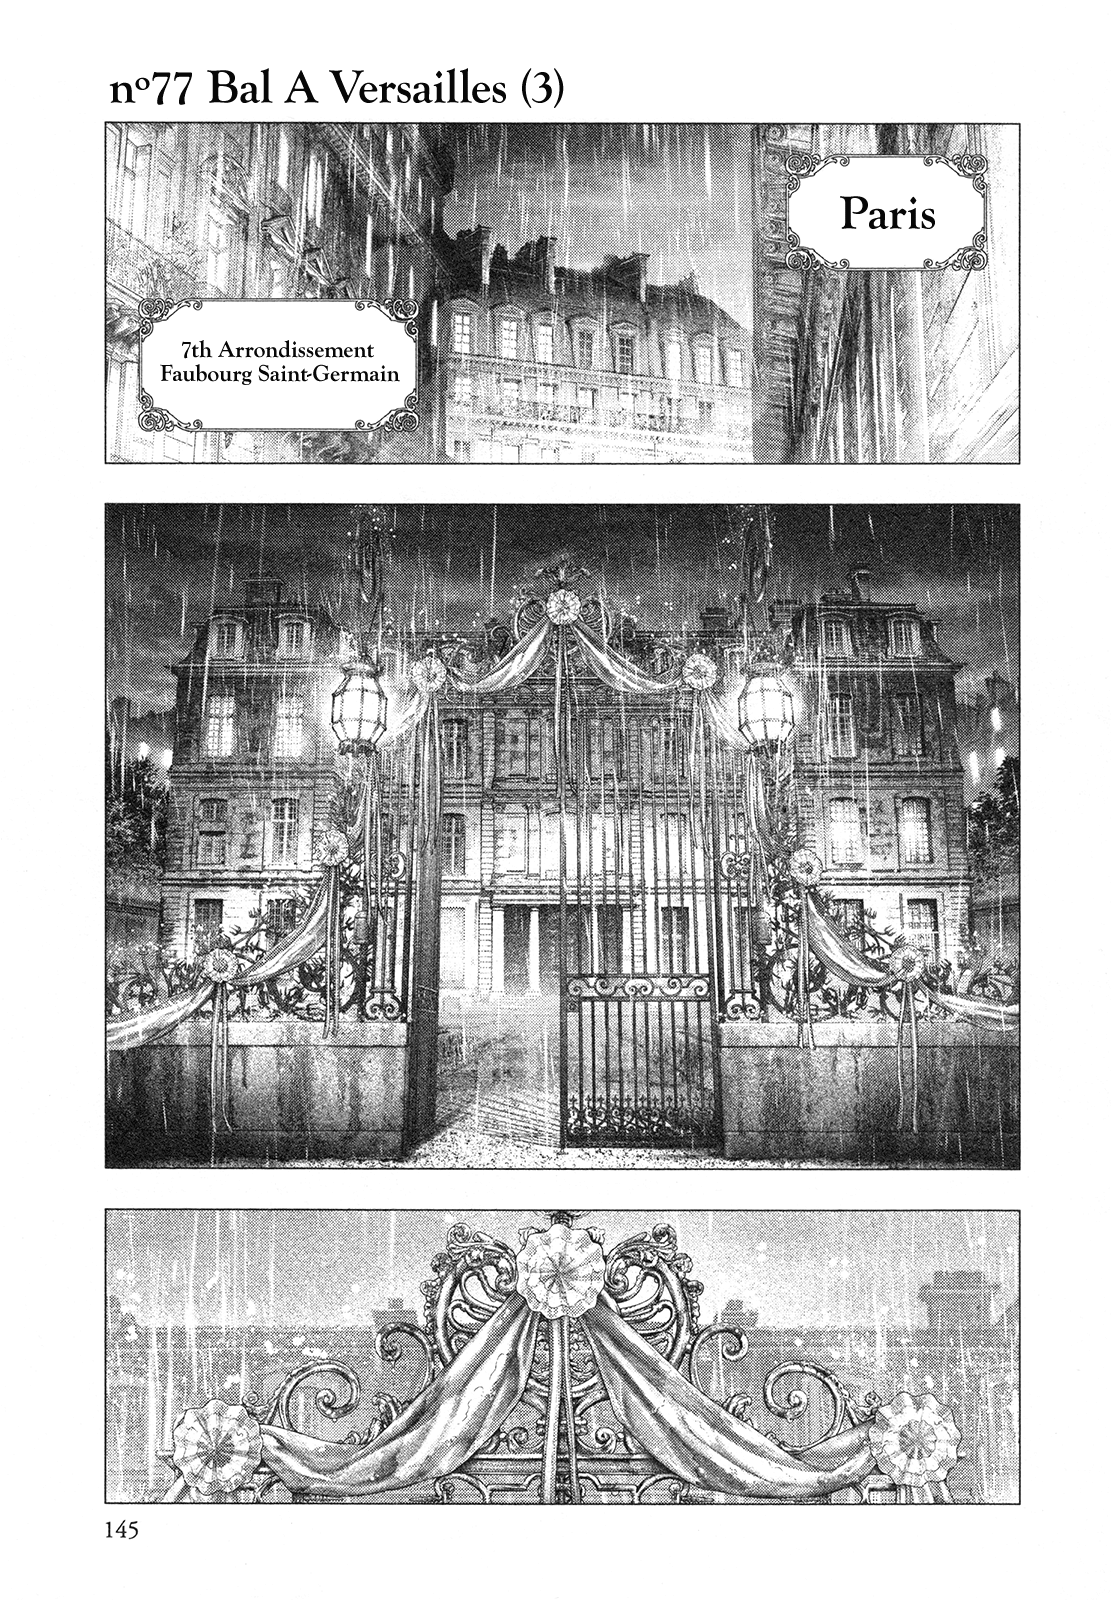 Innocent Rouge Vol.11-Chapter.77-Bal-A-Versailles-(3) Image